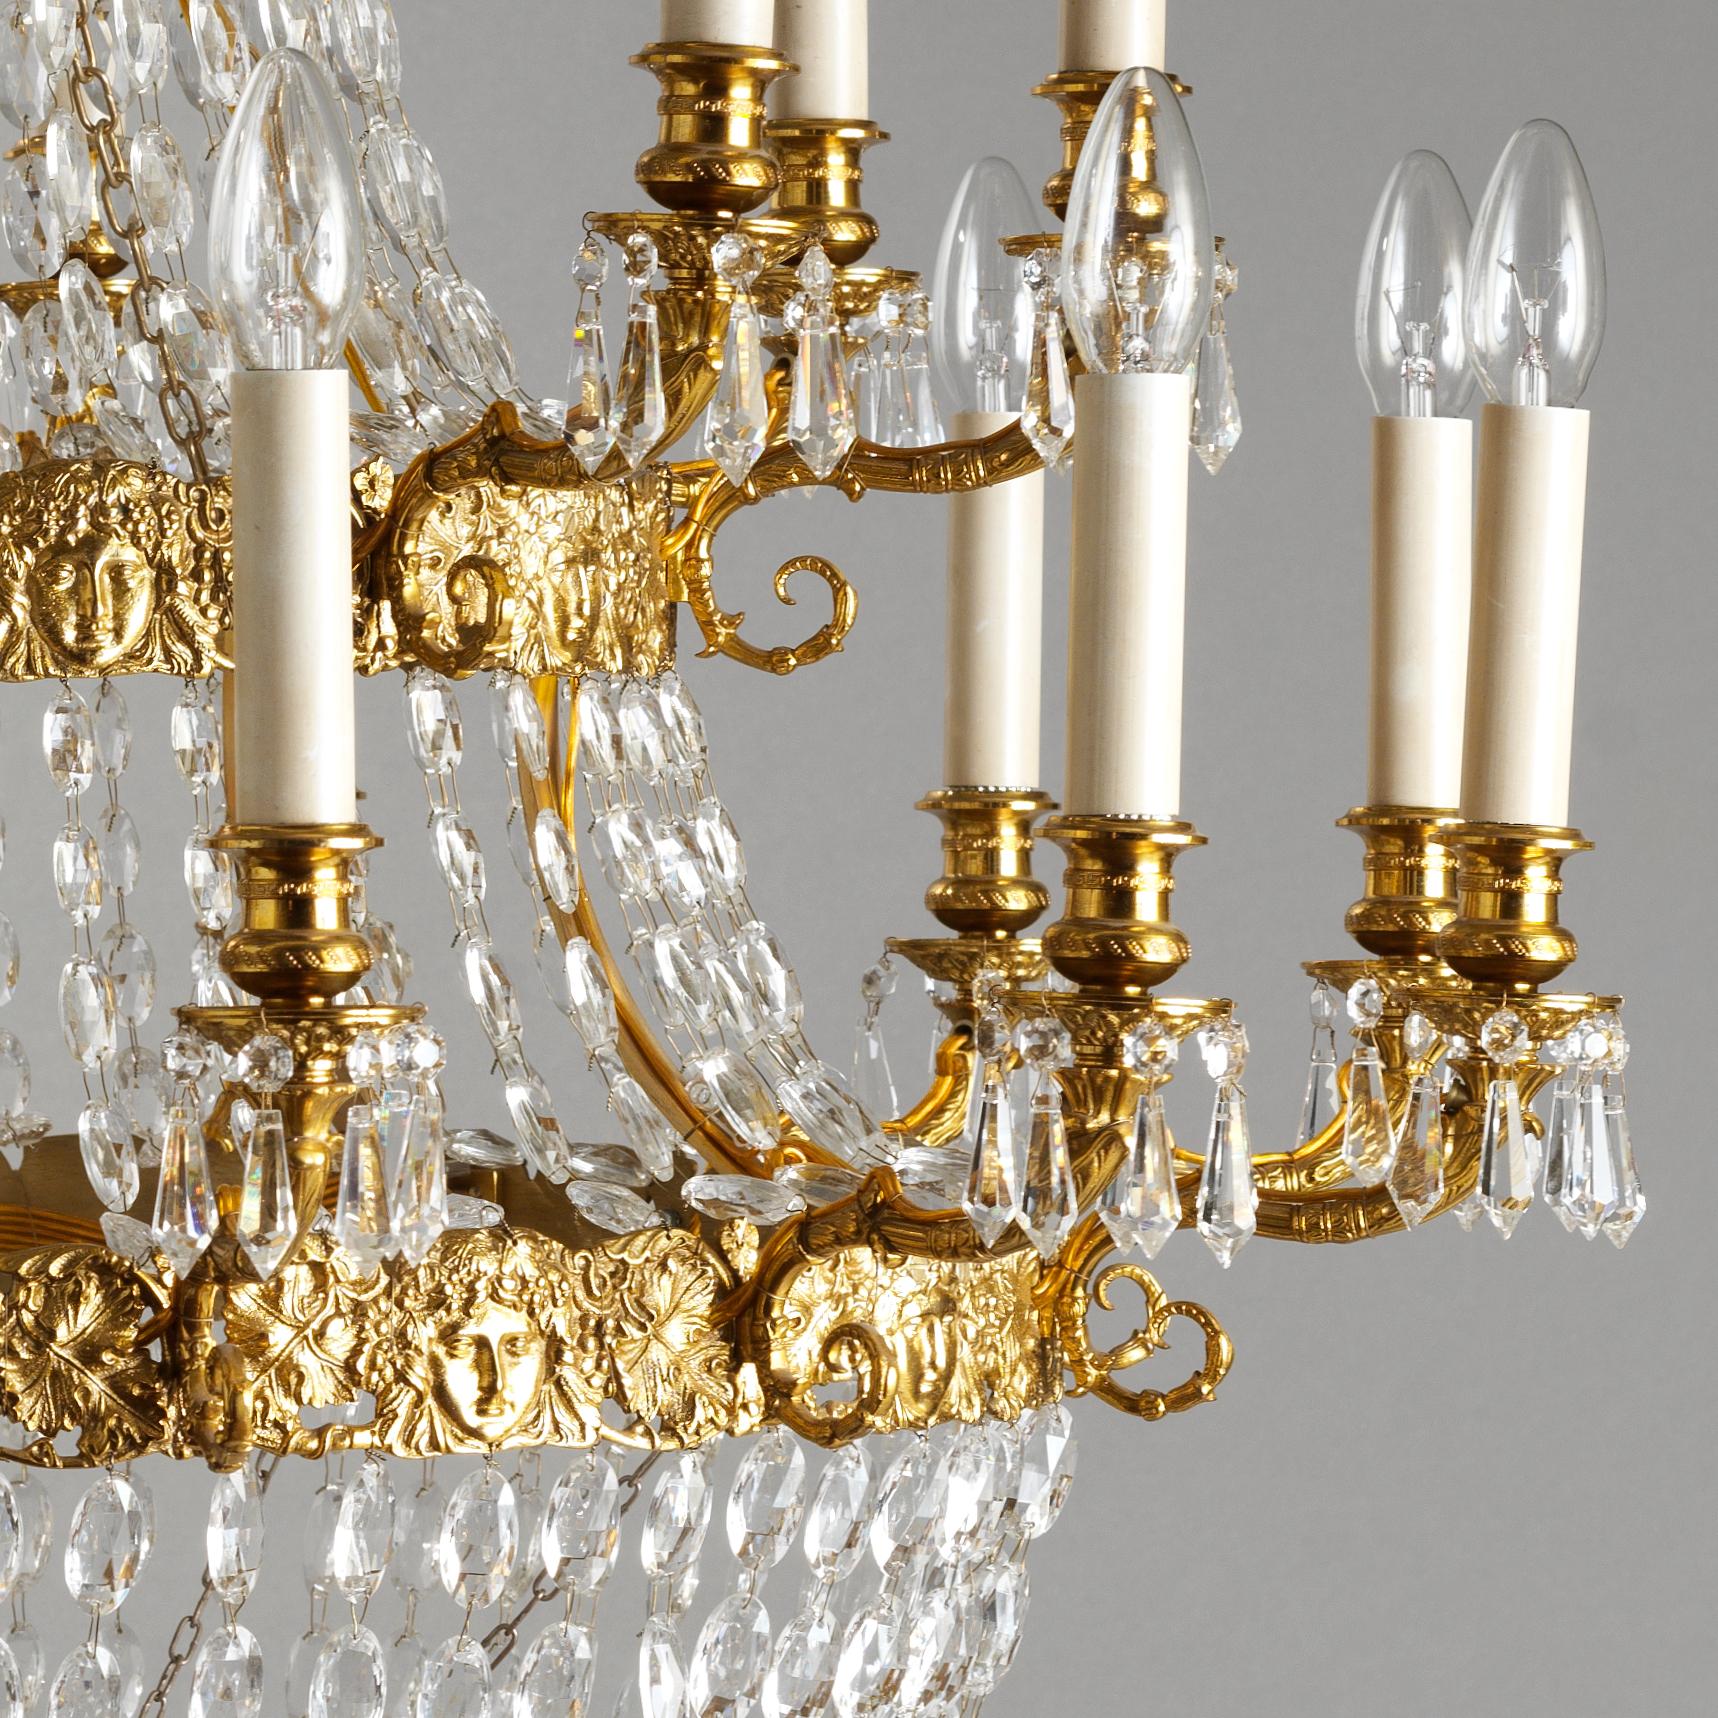 This French Empire Style Gilt Bronze and Crystal Chandelier by Gherardo Degli Albizzi has got twenty lights and features high quality handcrafted details.
Top crowns in characterized by rich vegetal decoration with oak leaves and faun masks.
Same